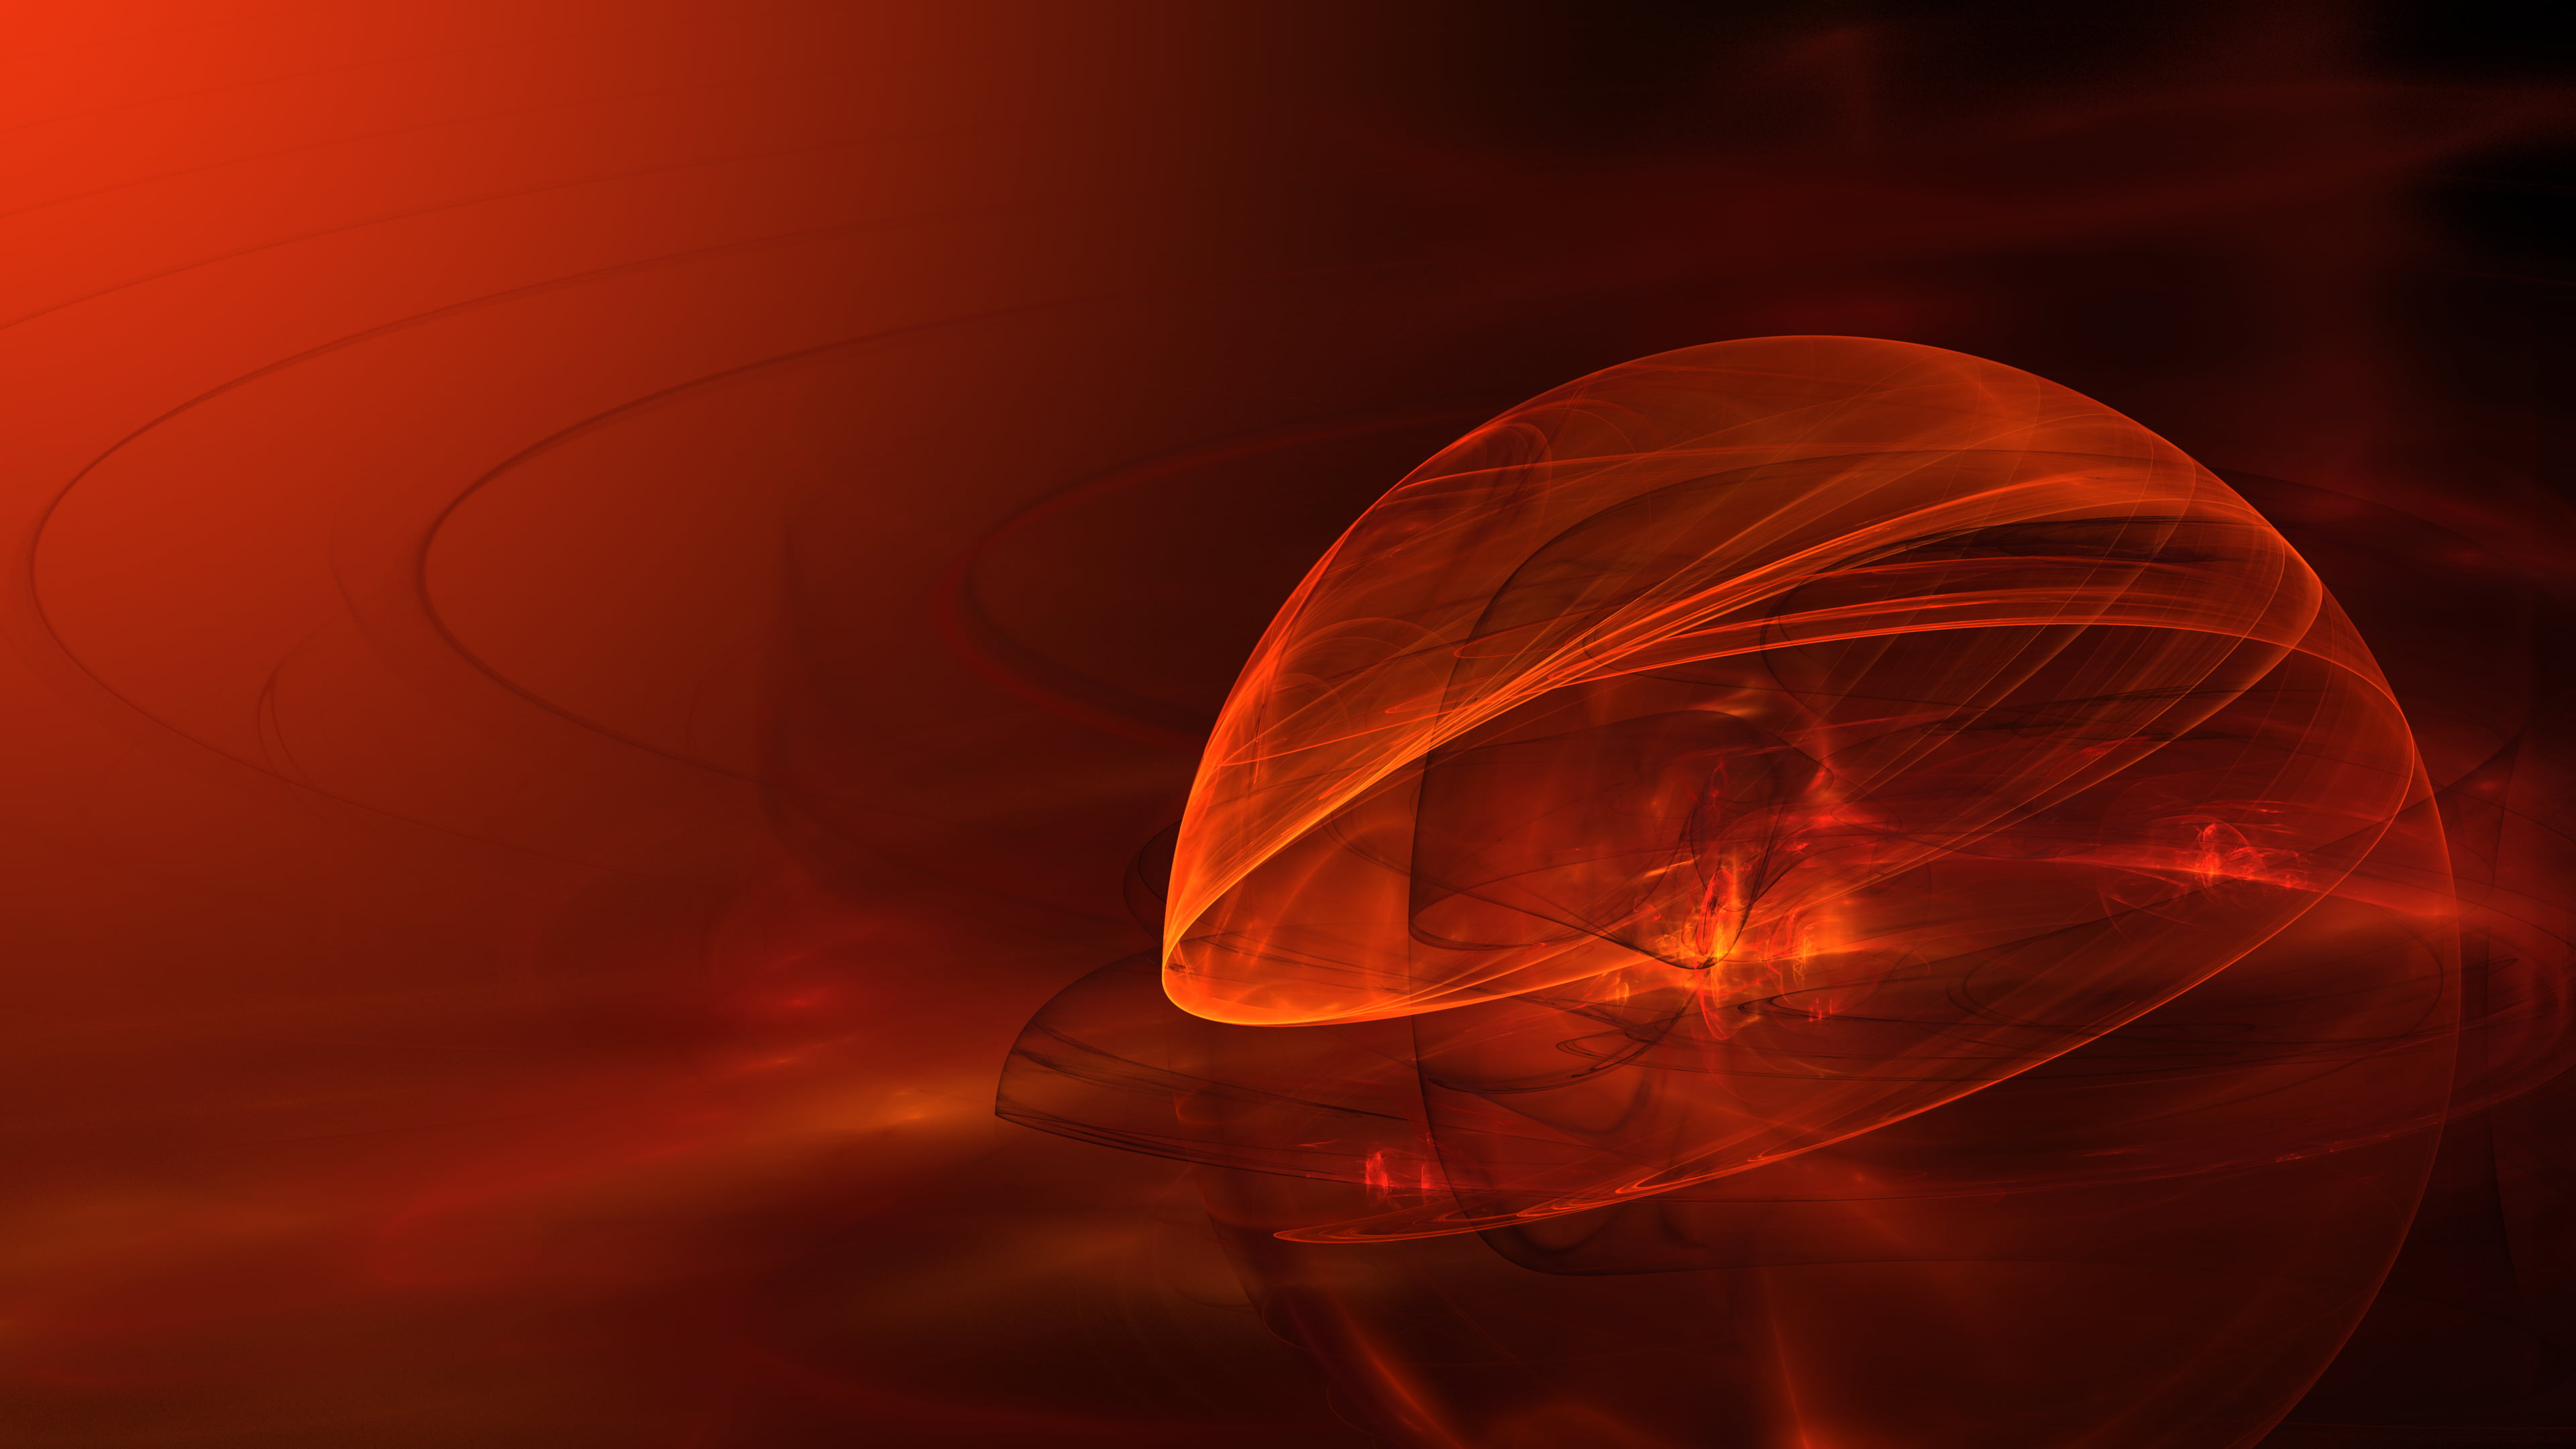 red and white ceramic plate, Apophysis, 3D fractal, abstract, orange